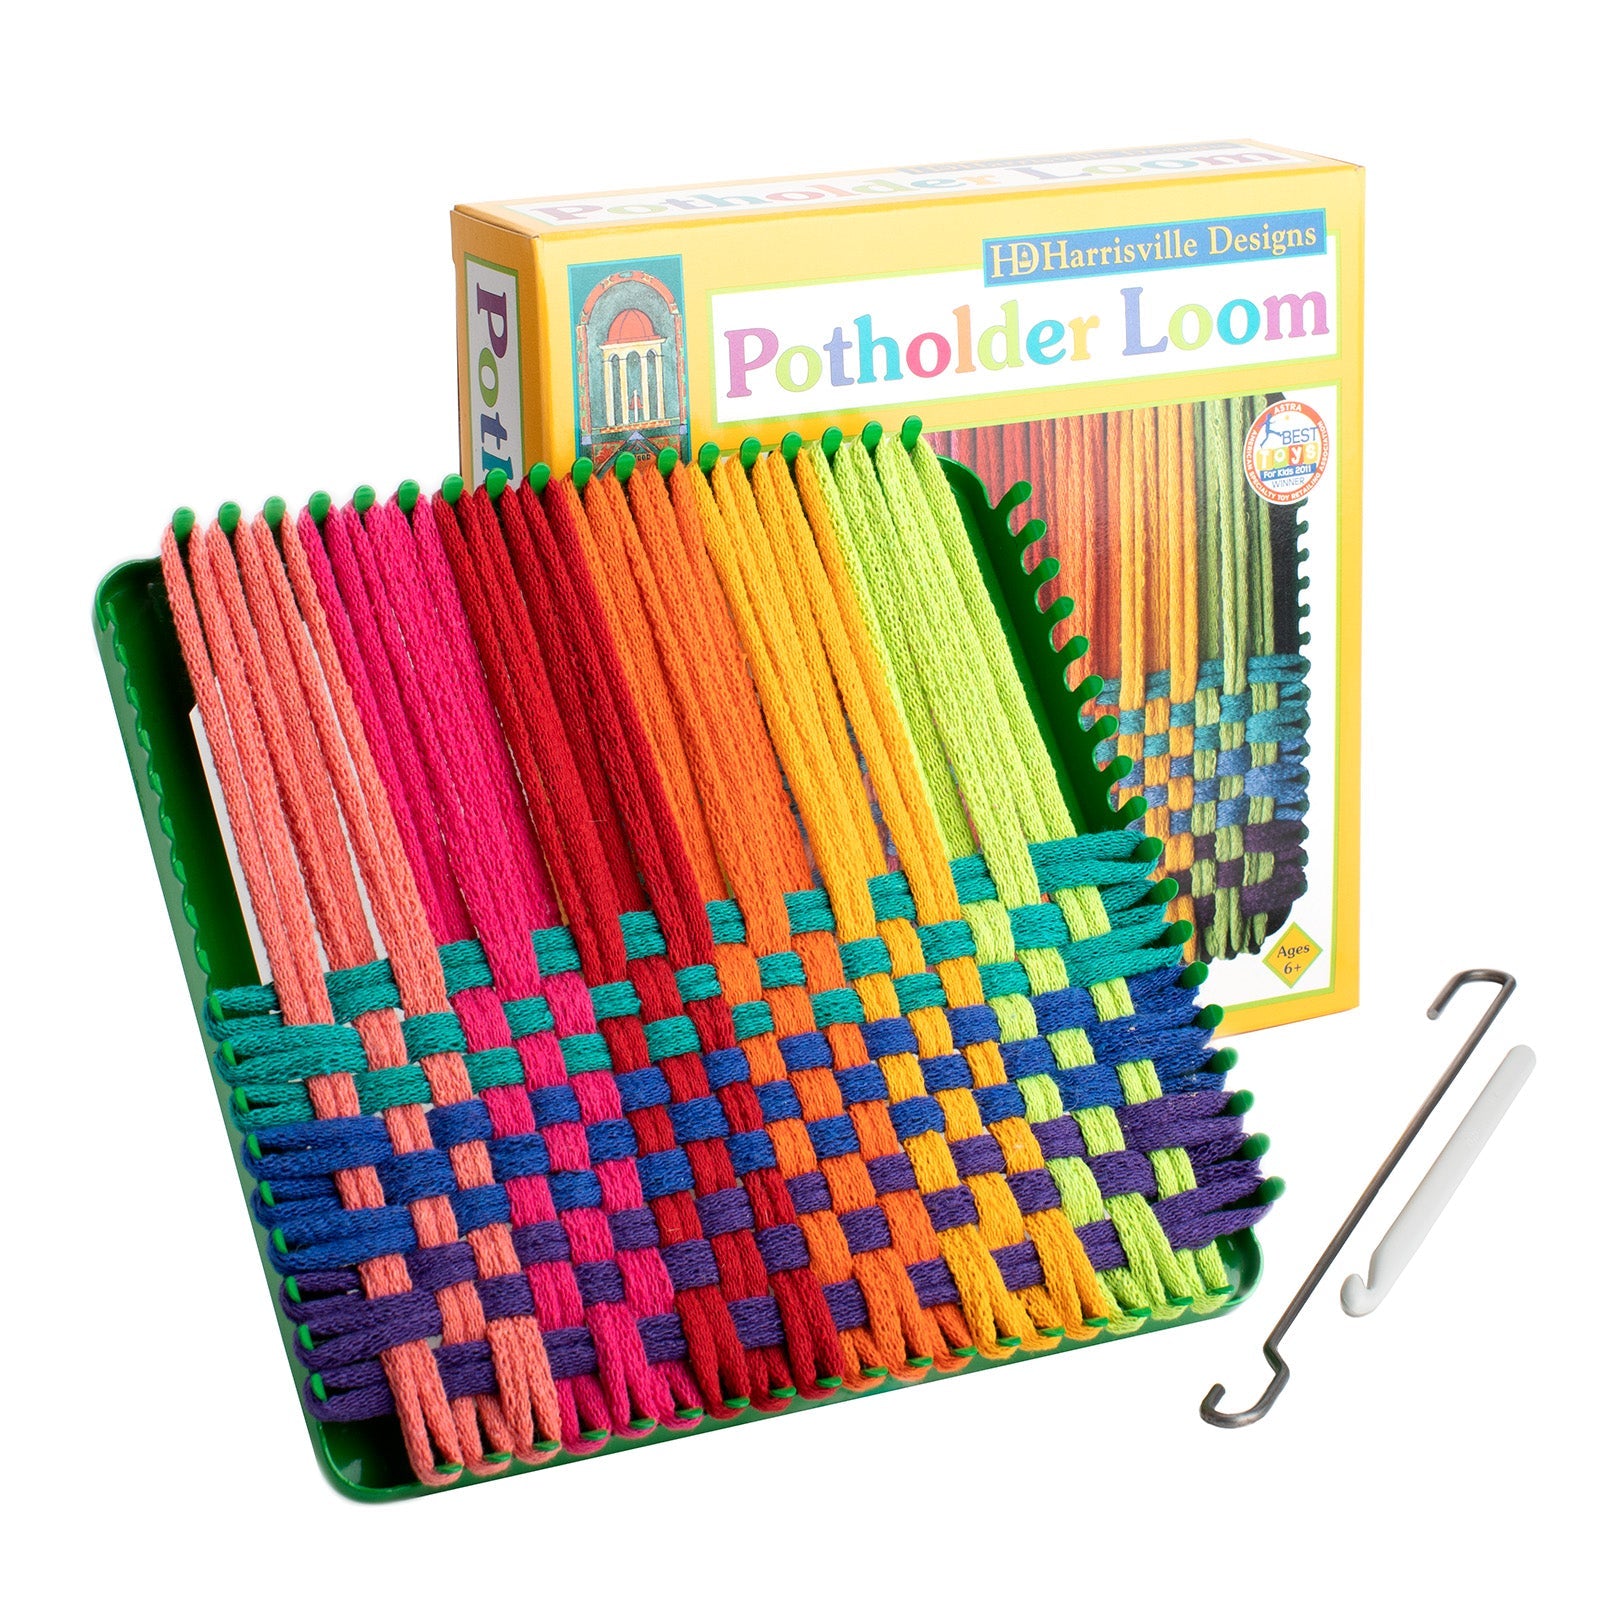 Potholder Loom Kit - Traditional Size - Friendly Loom by Harrisville Designs